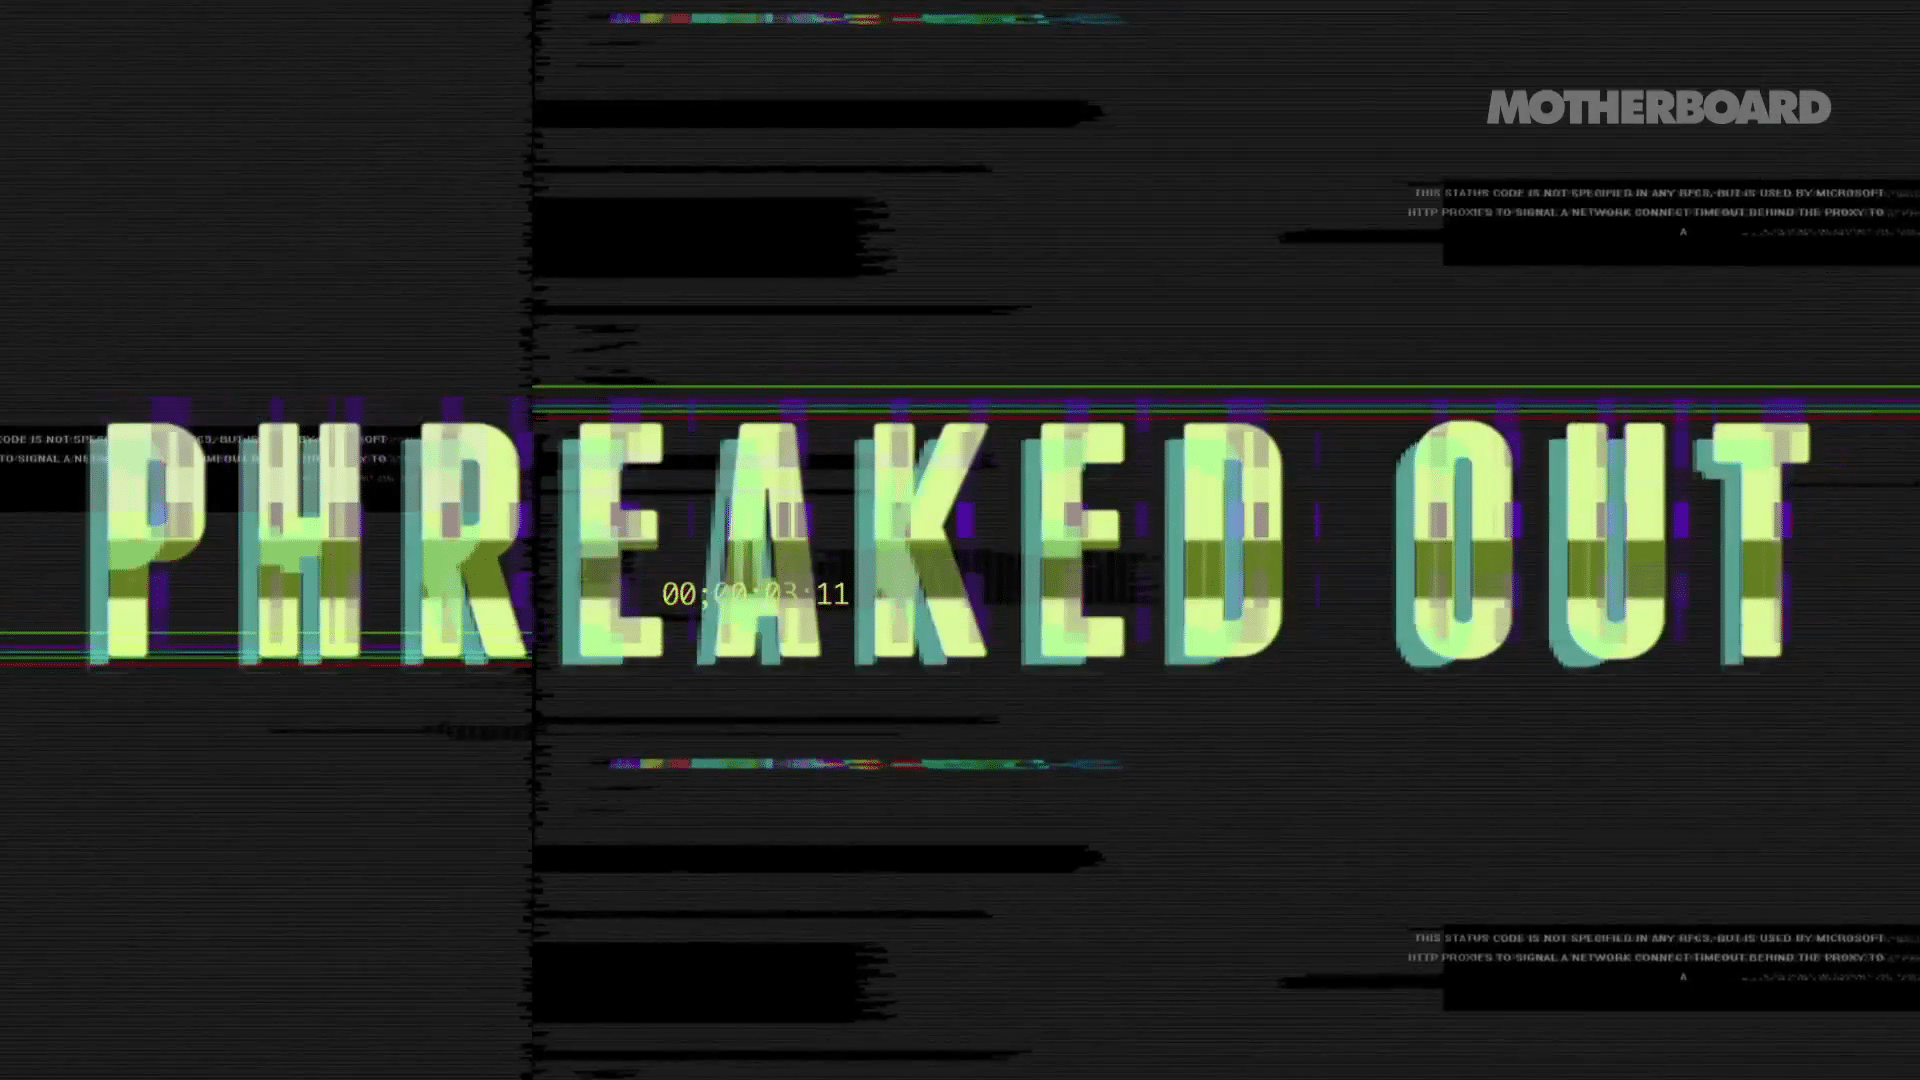 How Anything Can Be Hacked: Phreaked Out 35